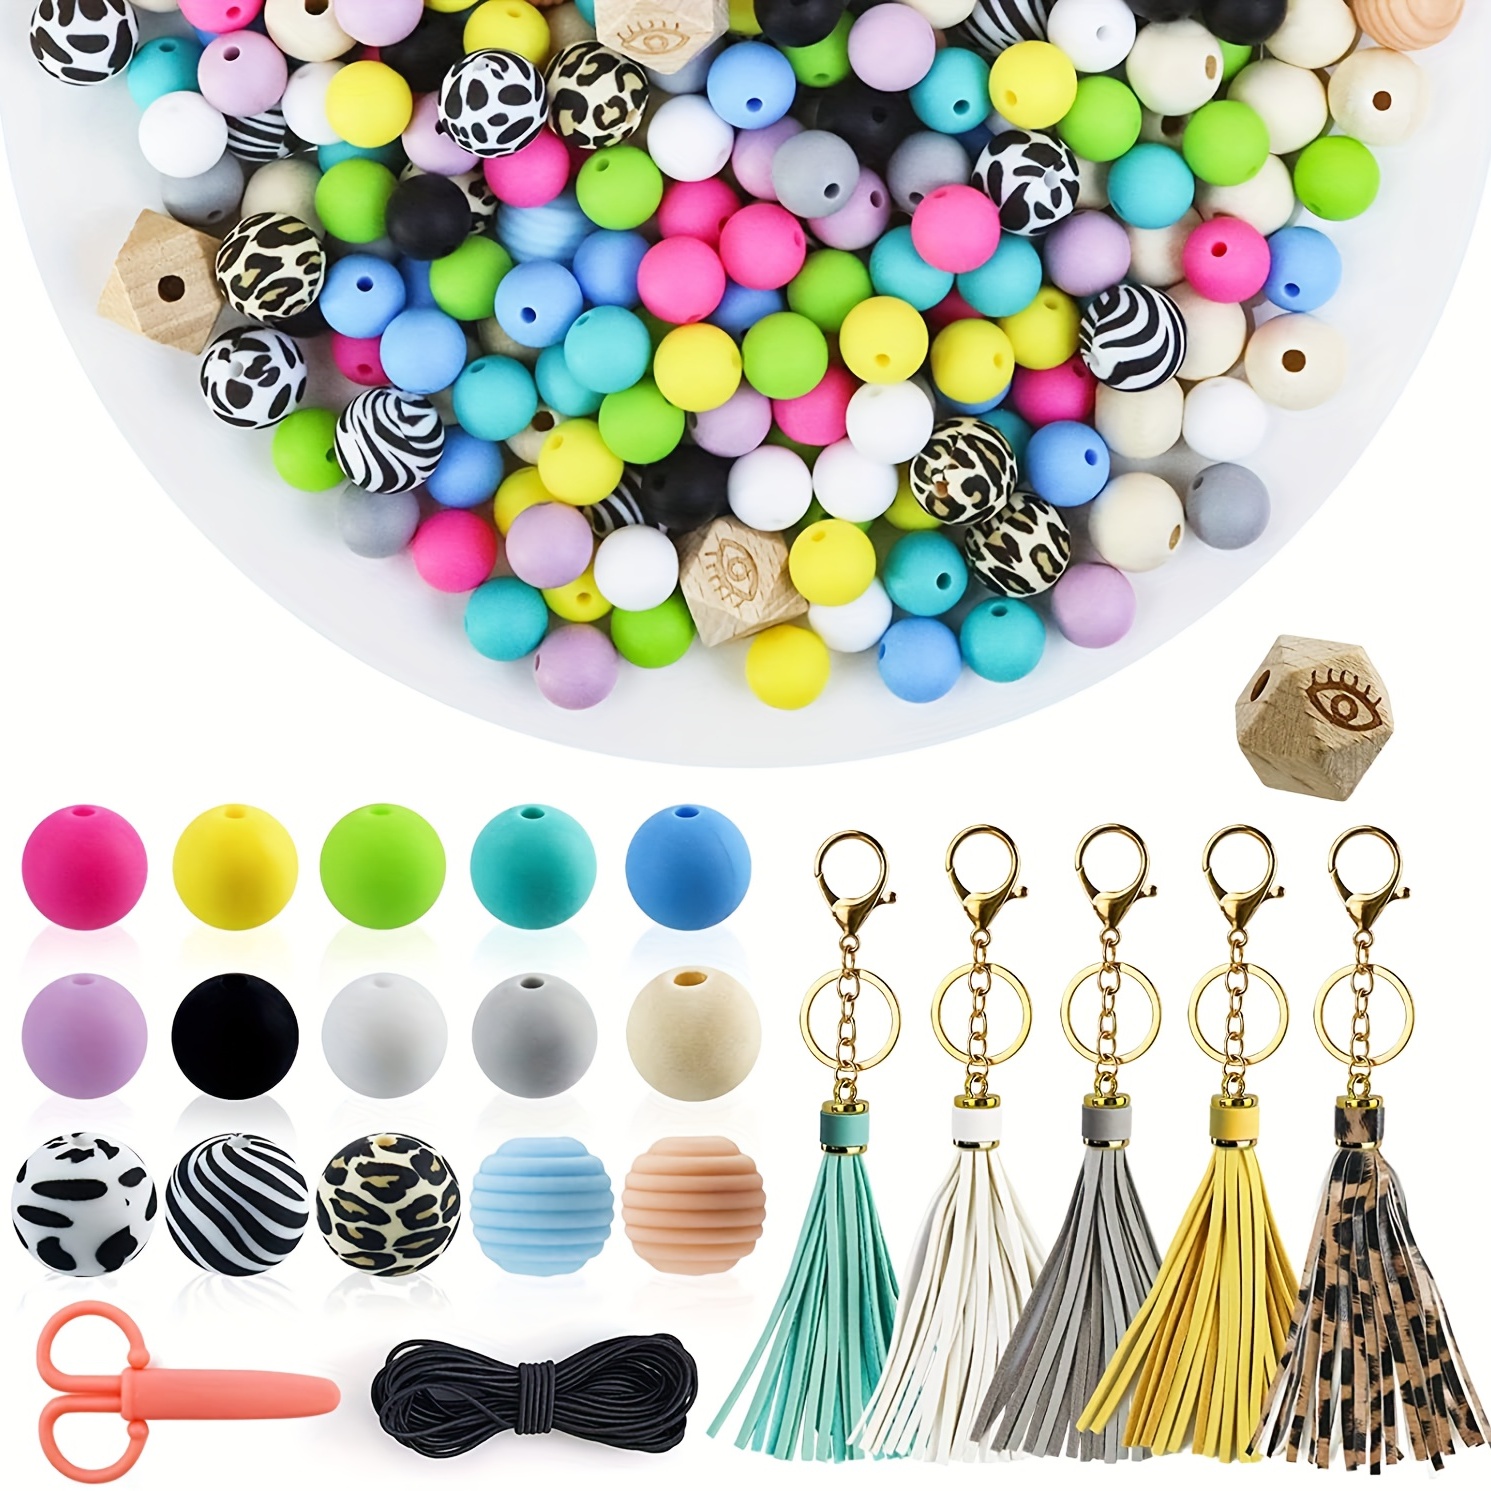 221PCS Silicone Beads for Keychain Making, Silicone Focal Bead